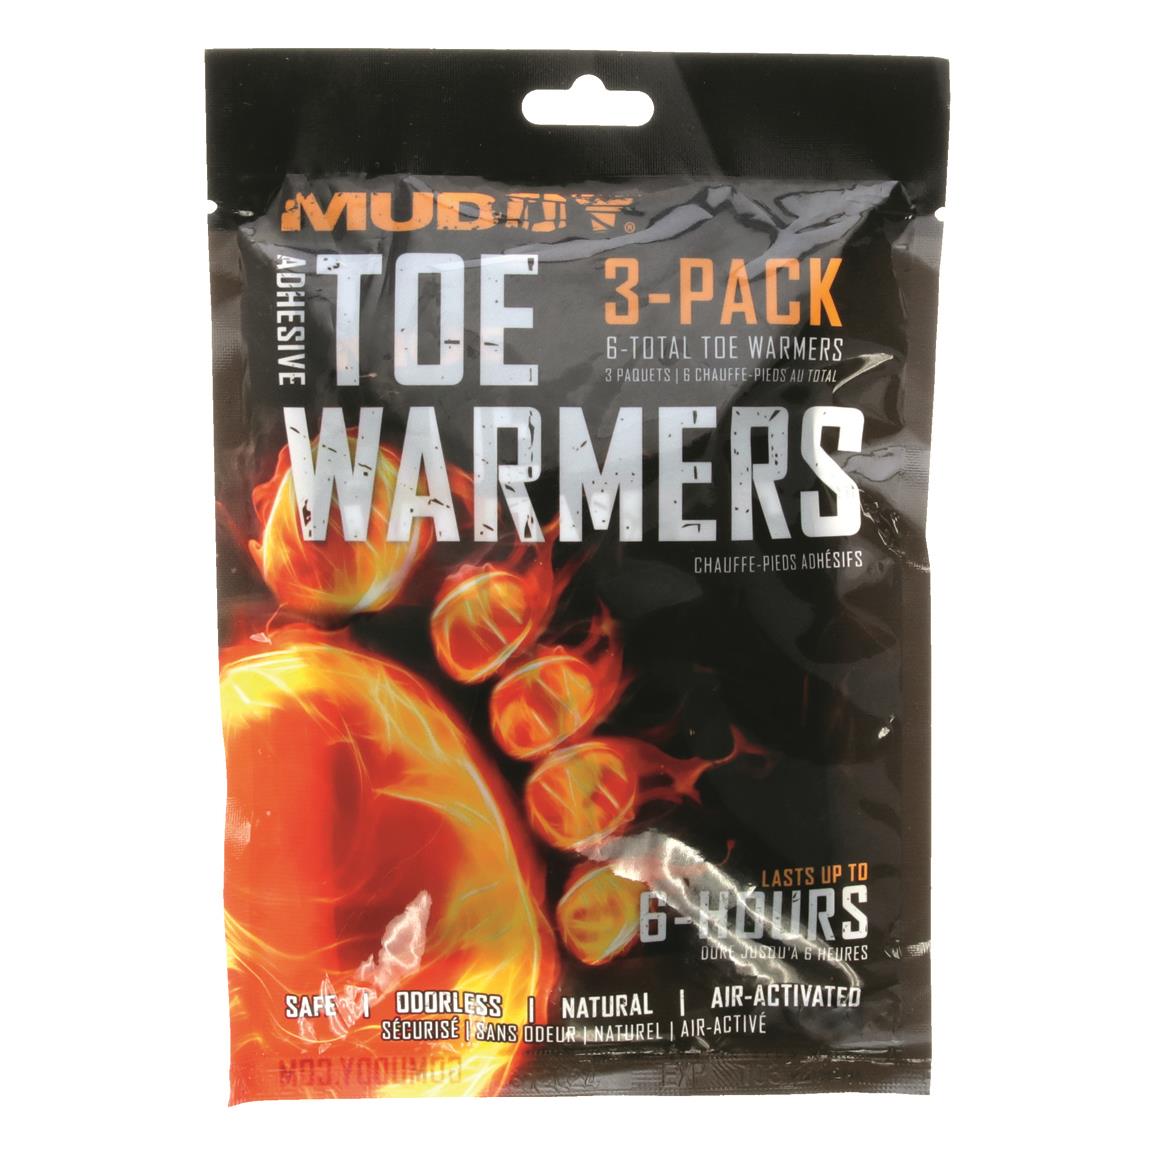 Muddy Disposable Toe Warmers with Adhesive, 3-pack